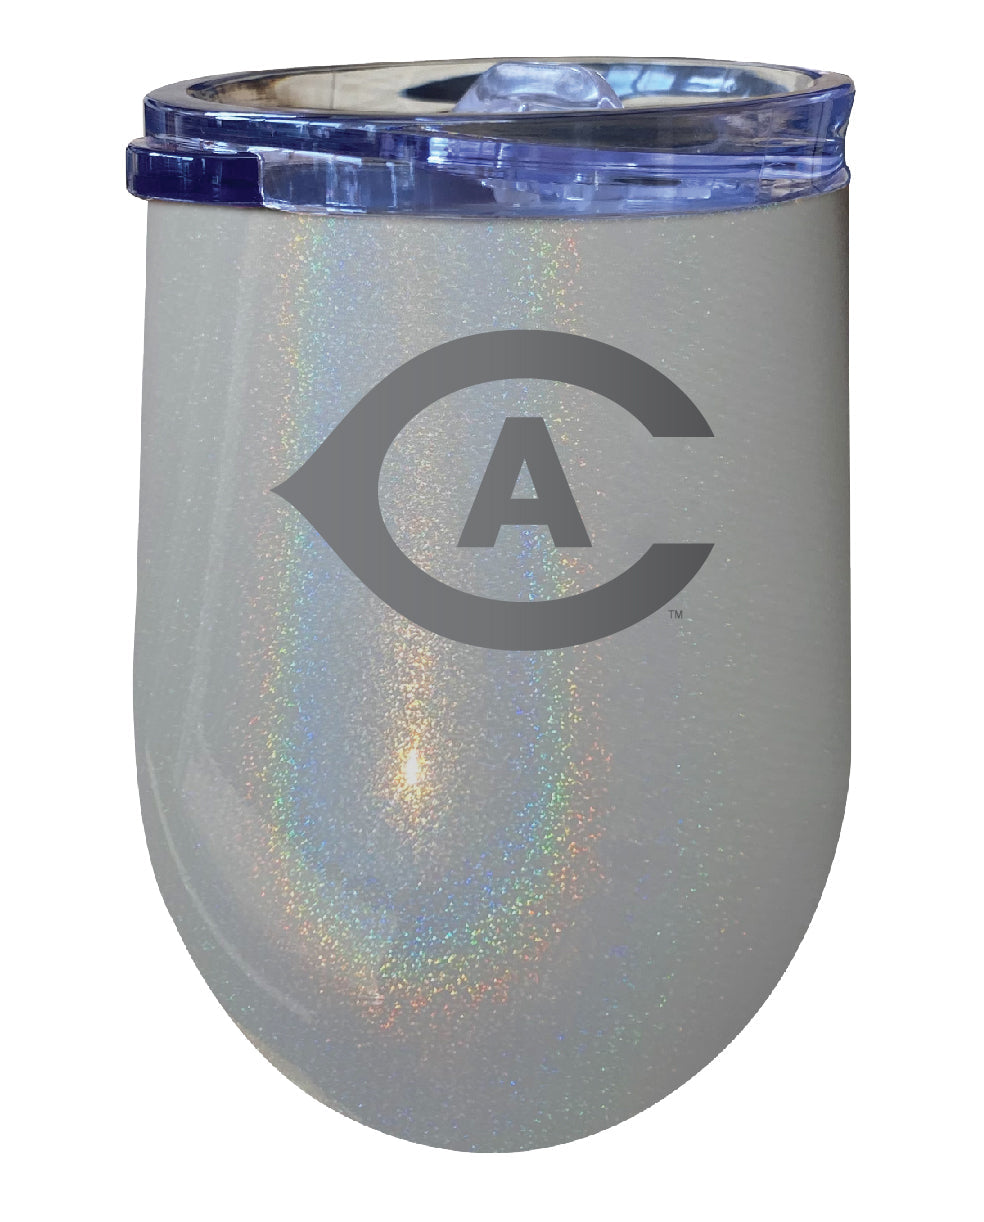 UC Davis Aggies NCAA Laser-Etched Wine Tumbler - 12oz Rainbow Glitter Gray Stainless Steel Insulated Cup